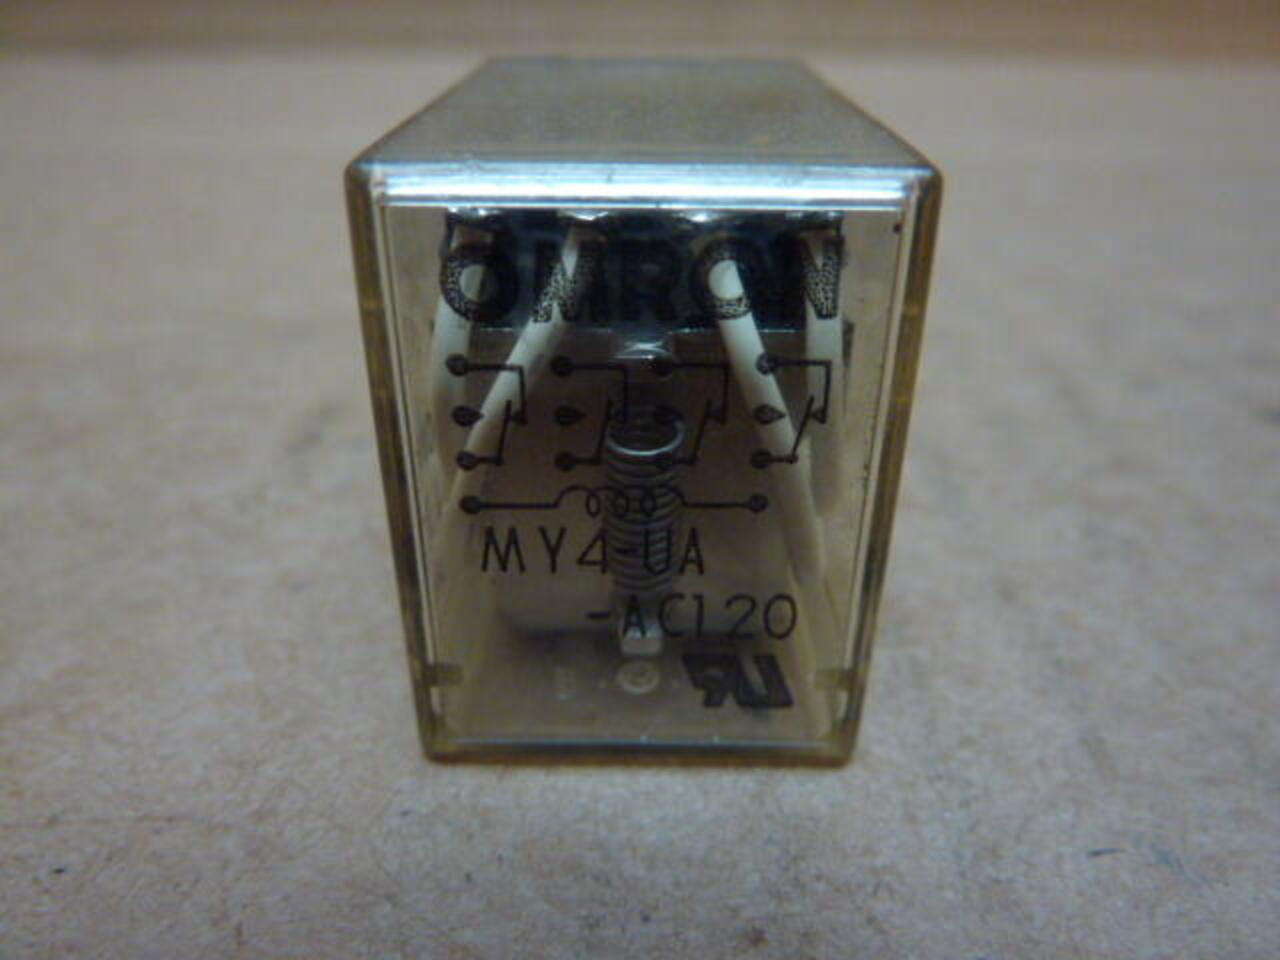 NEW OMRON LY4-UA-AC120 RELAY AC120V COIL 